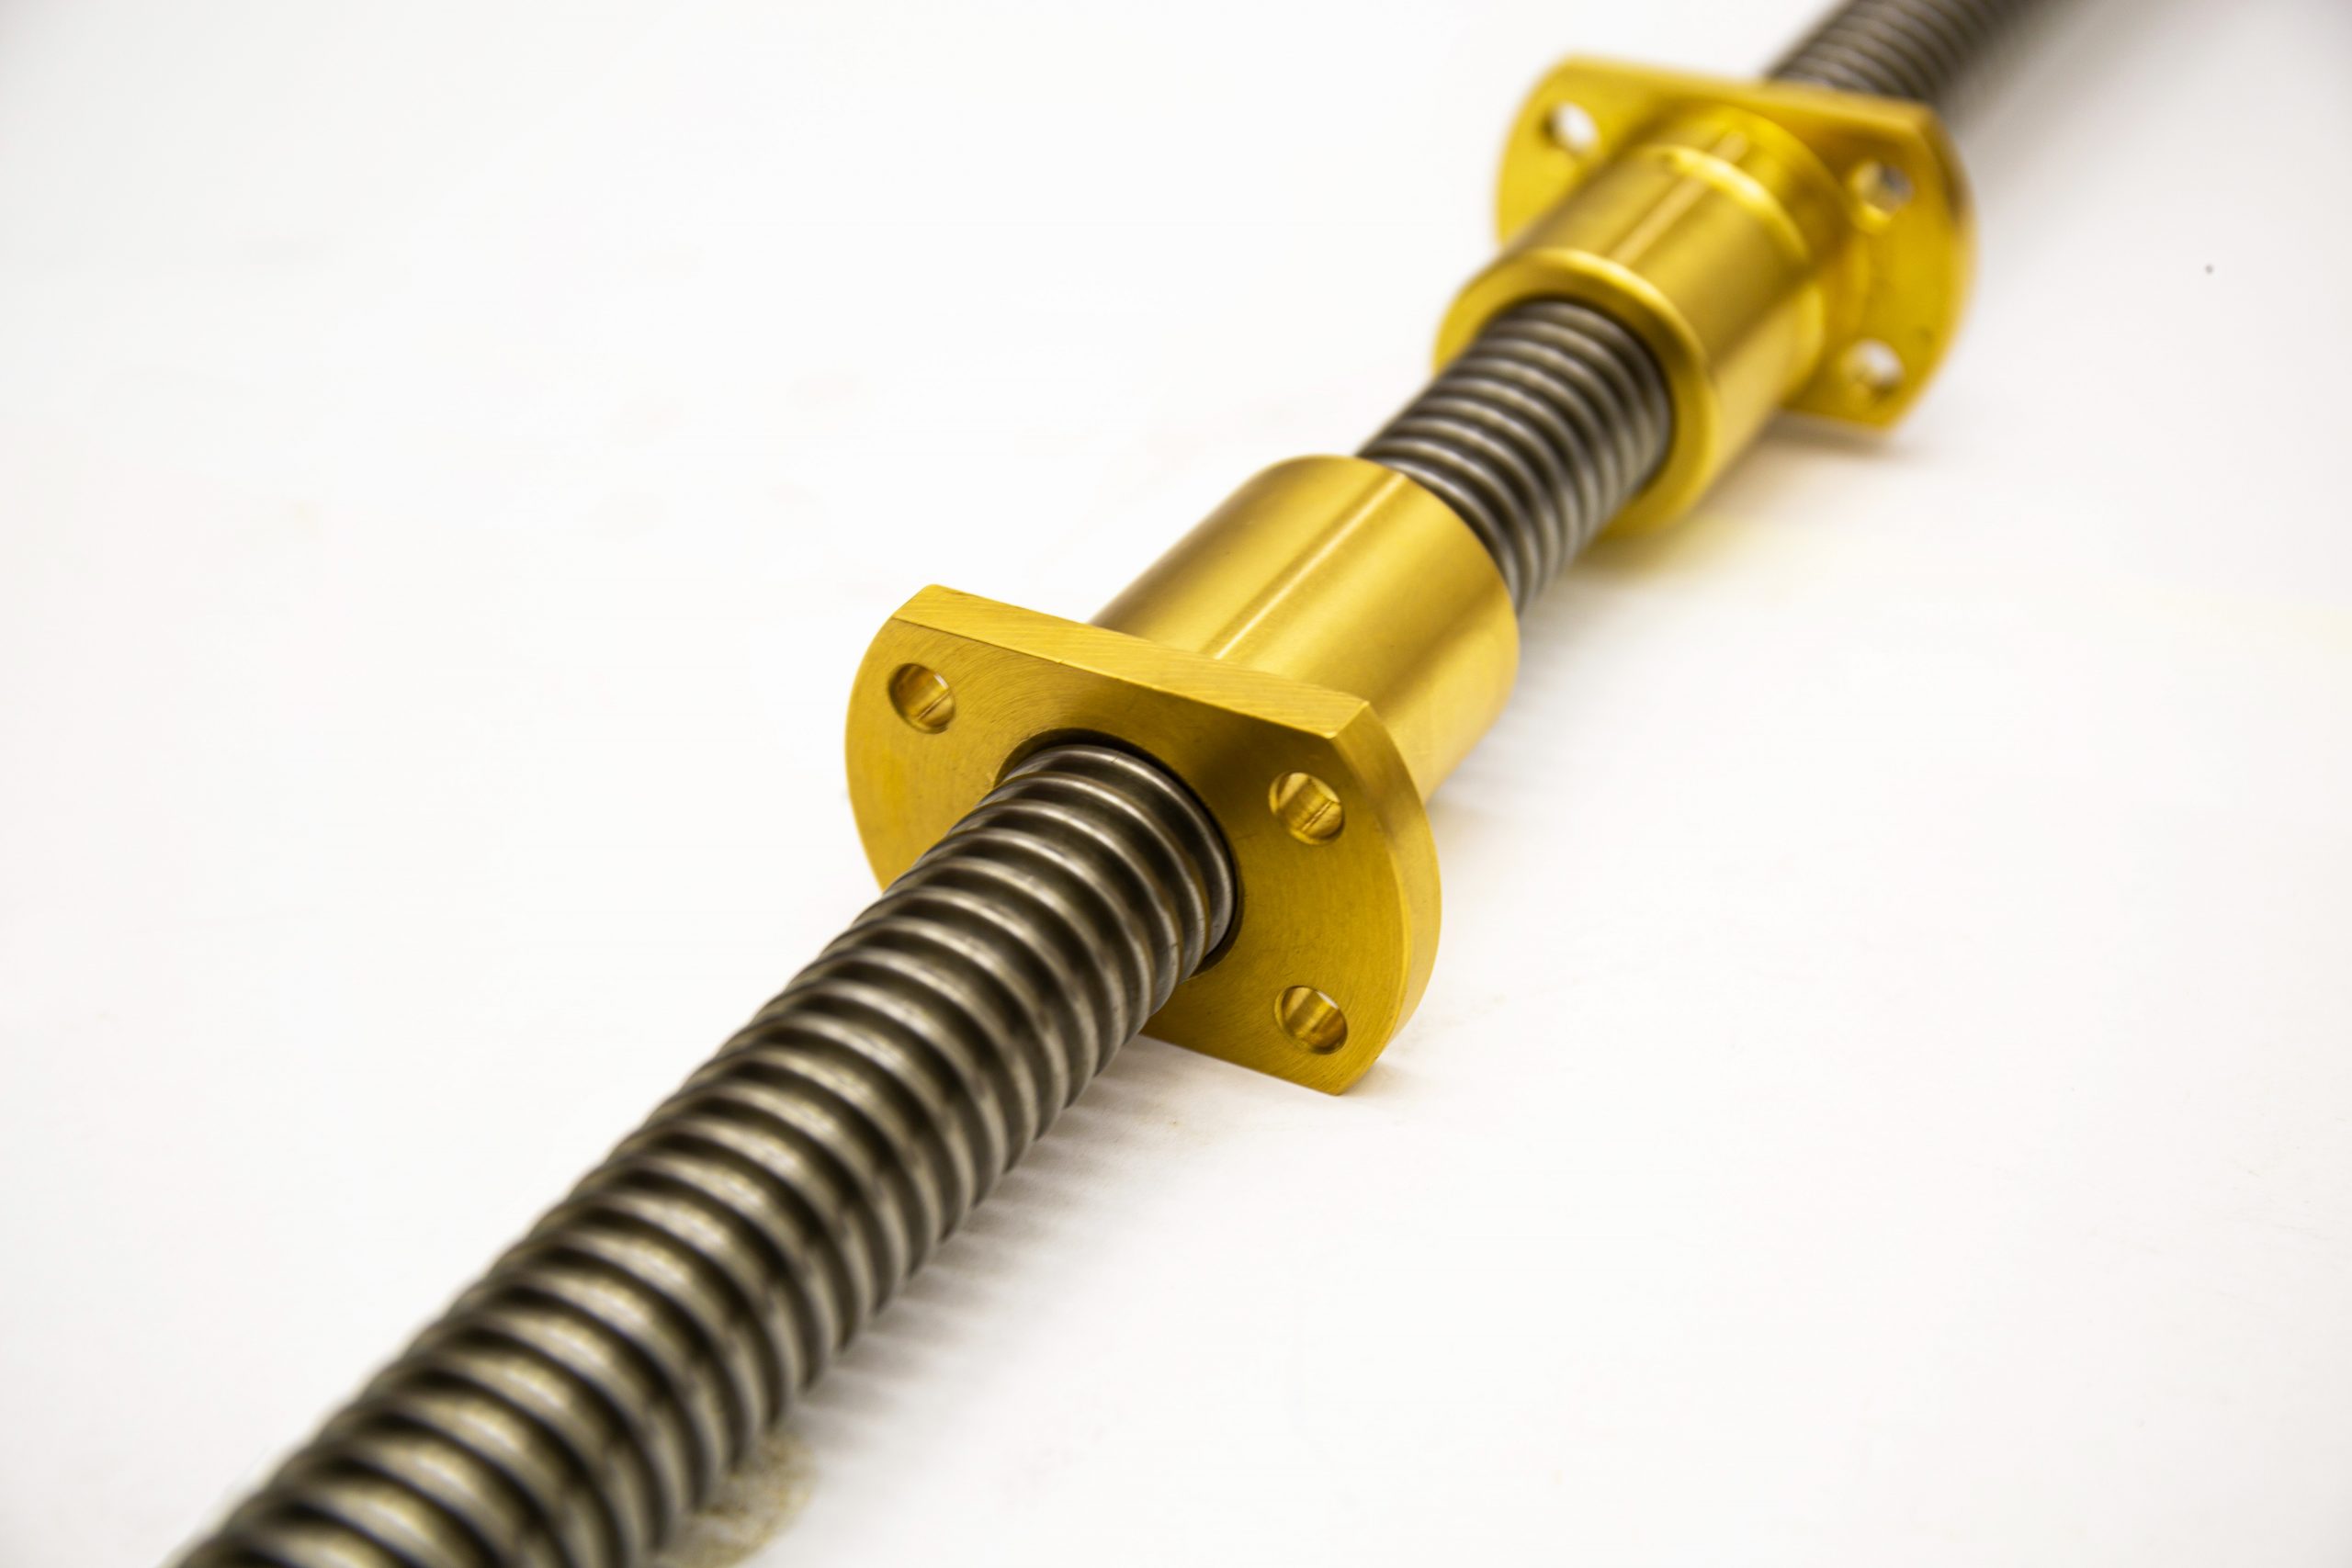 Ball screw vs Lead screw: Differences and Benefits - Shafttech